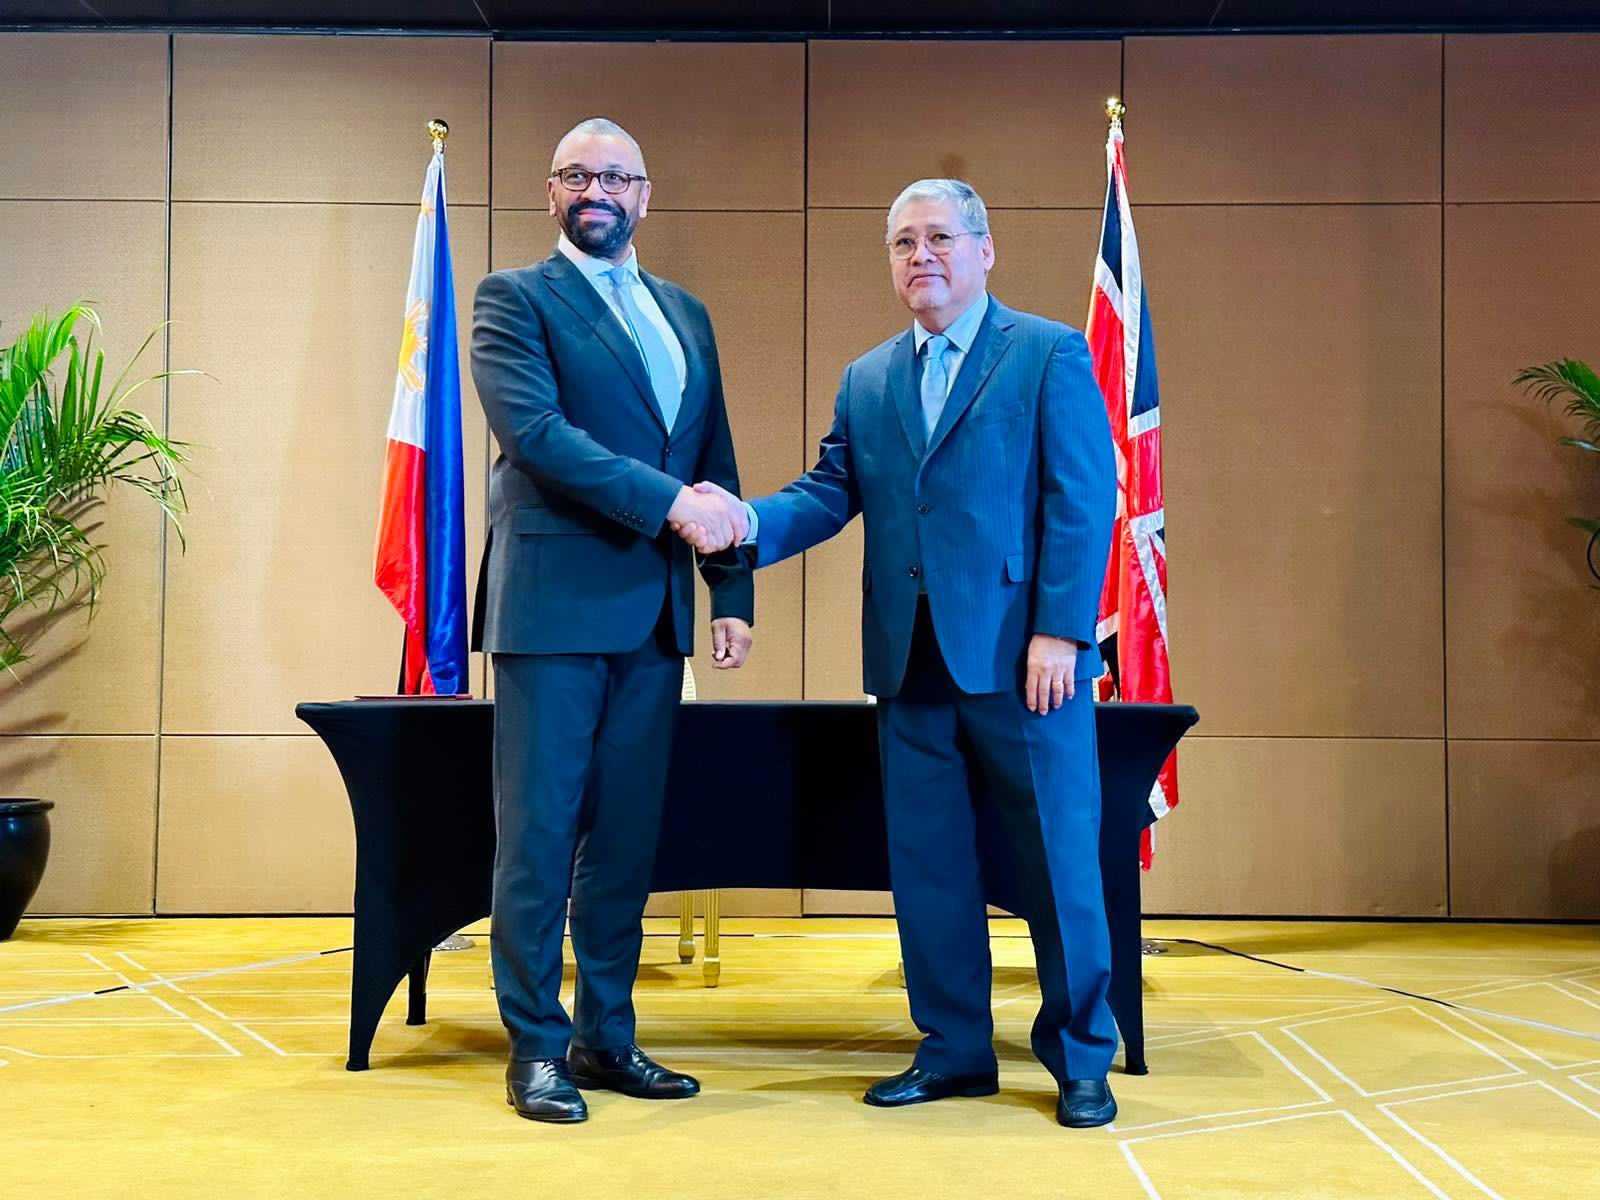 UK Foreign Minister visit to Manila to strengthen relations on trade, maritime and defense